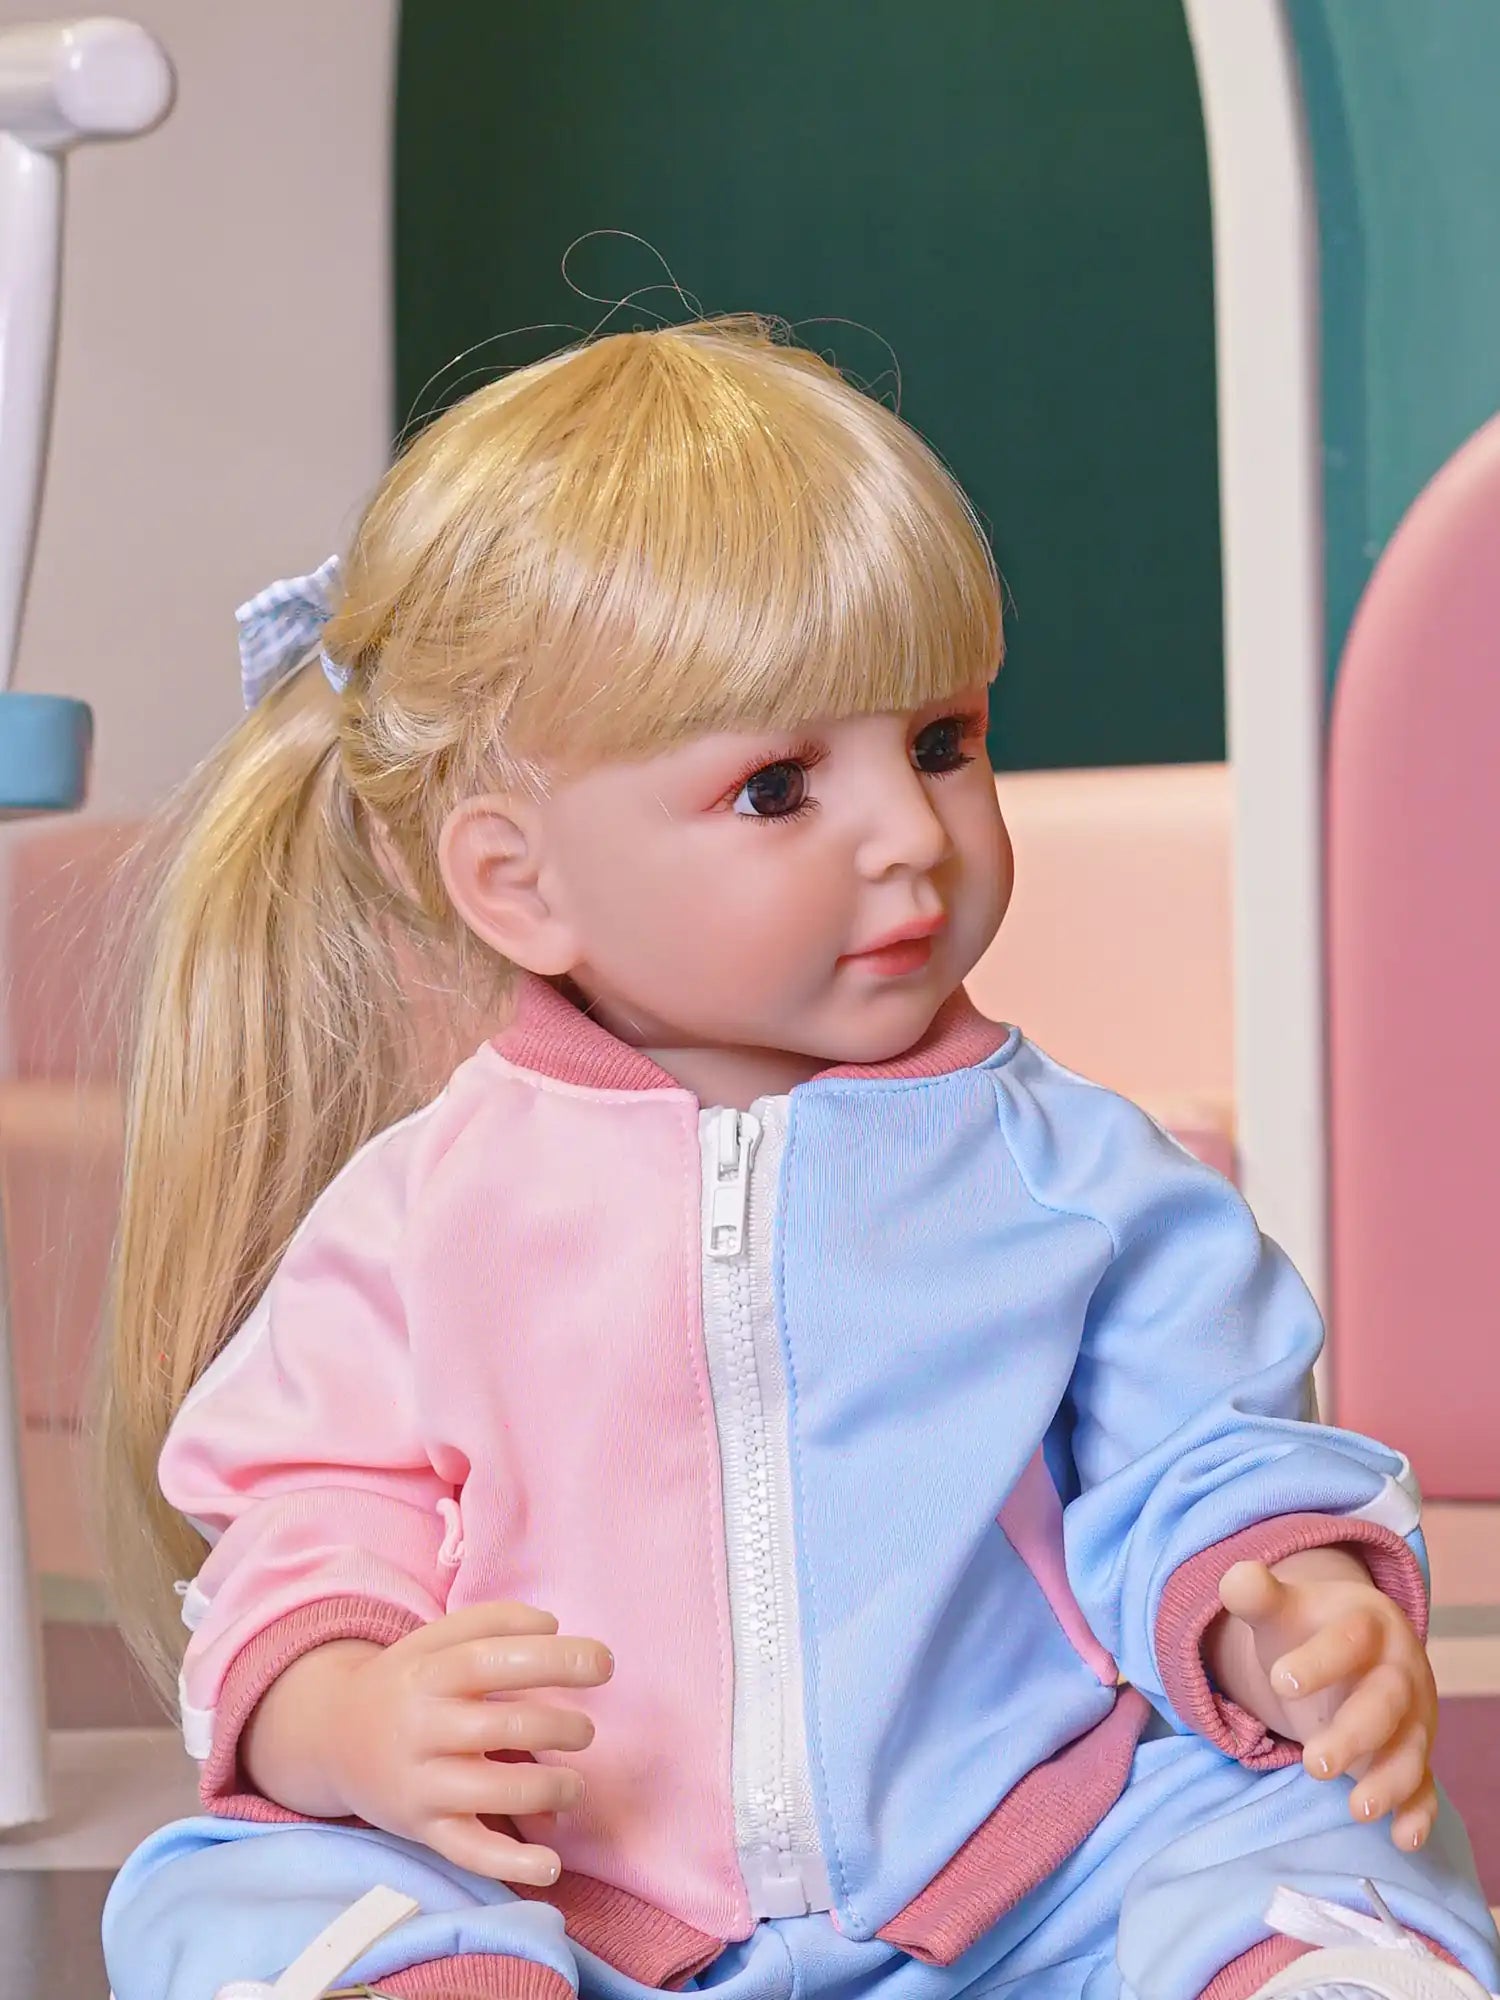 Realistic doll in pink and blue, with a sporty look, sitting indoors.